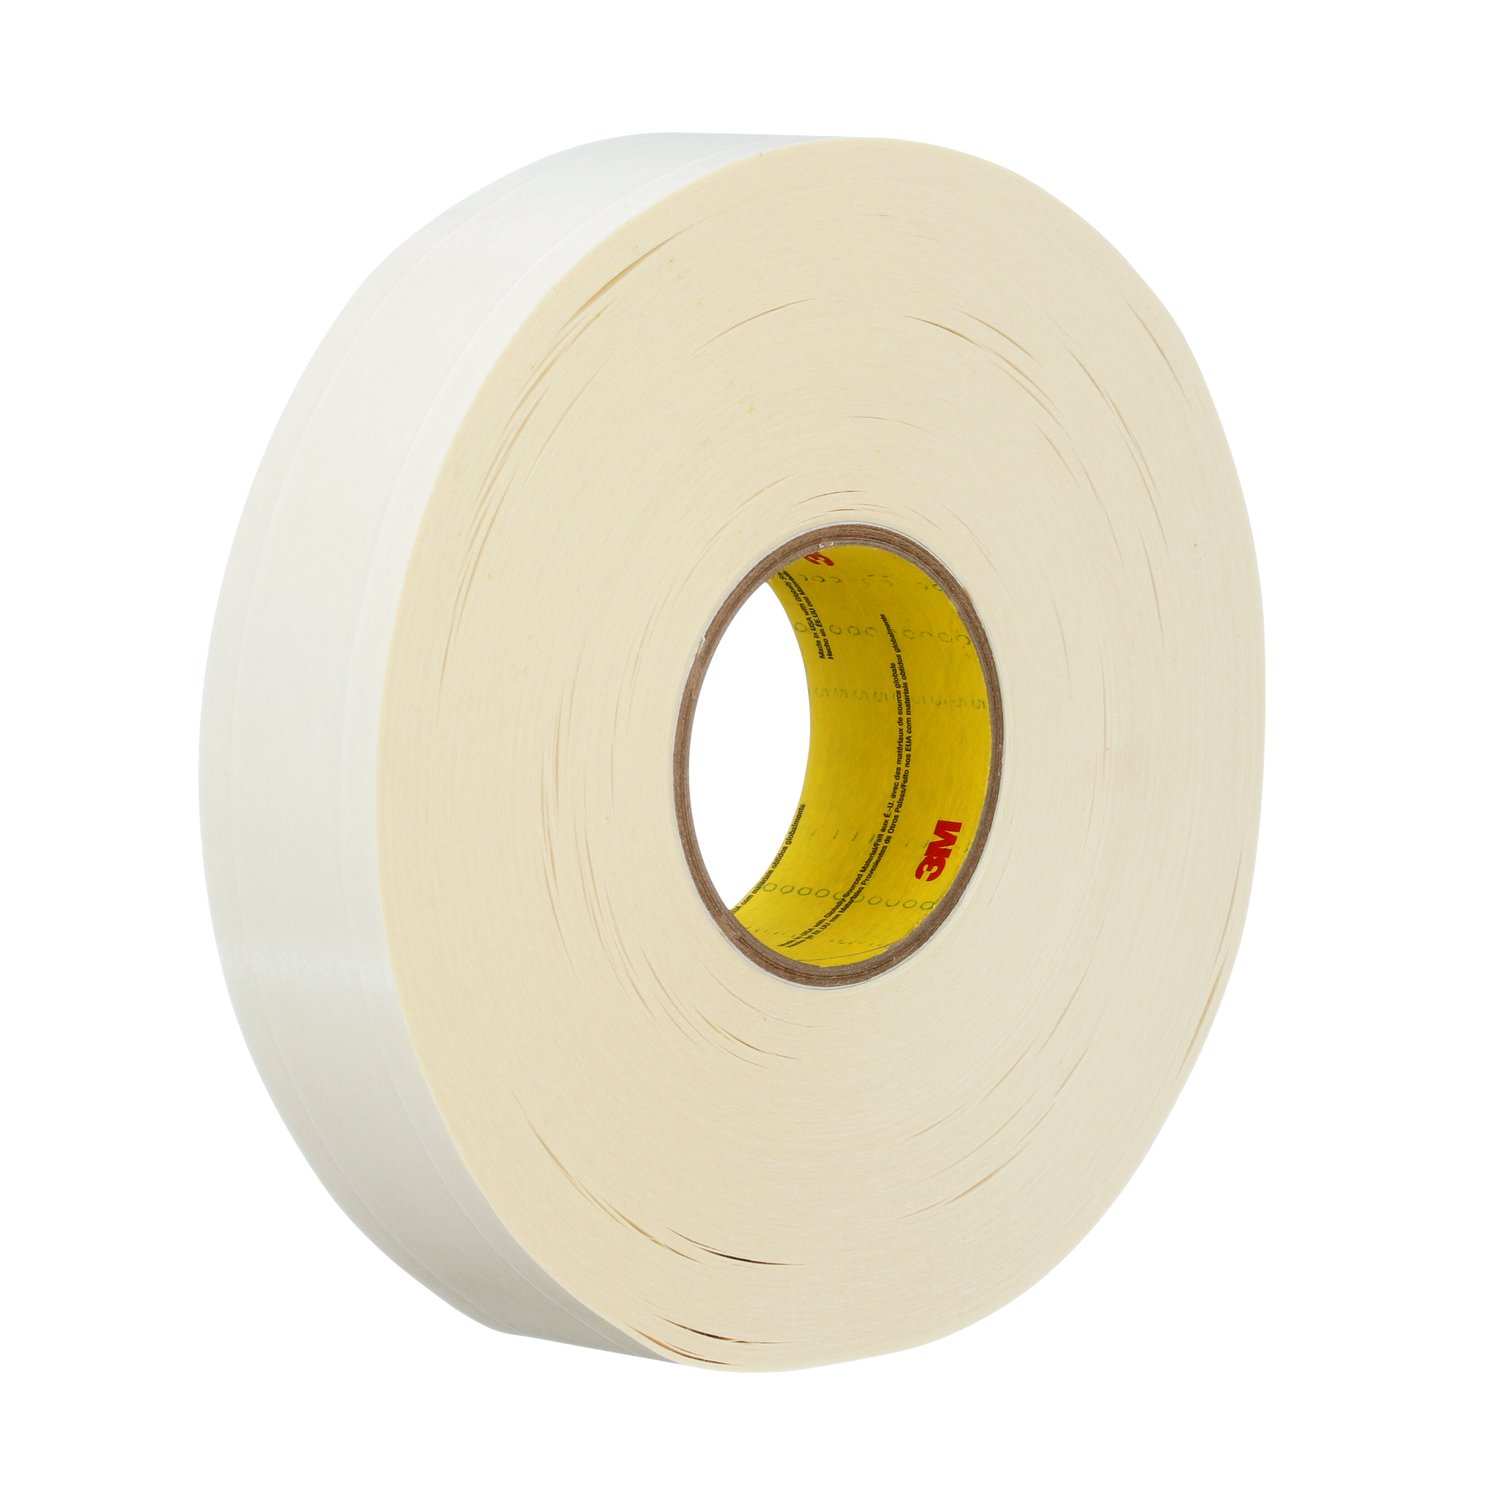 7100028179 - 3M Repulpable Heavy Duty Double Coated Tape R3287, White, 96 mm x 55 m,
5 mil, 8 rolls per case